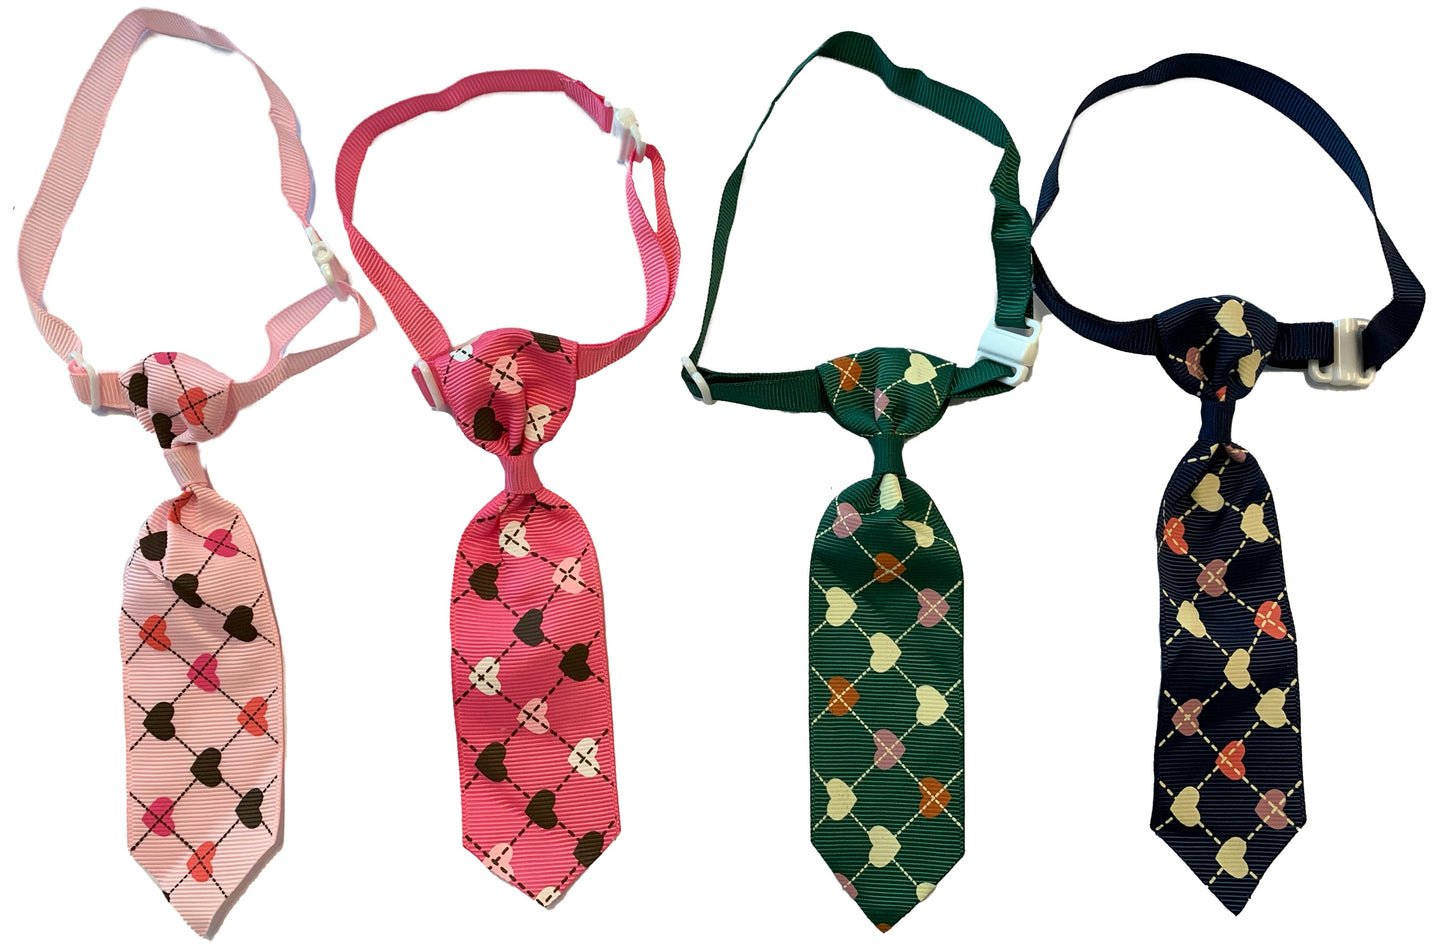 Doggy Tie with Hearts – 10 Pack